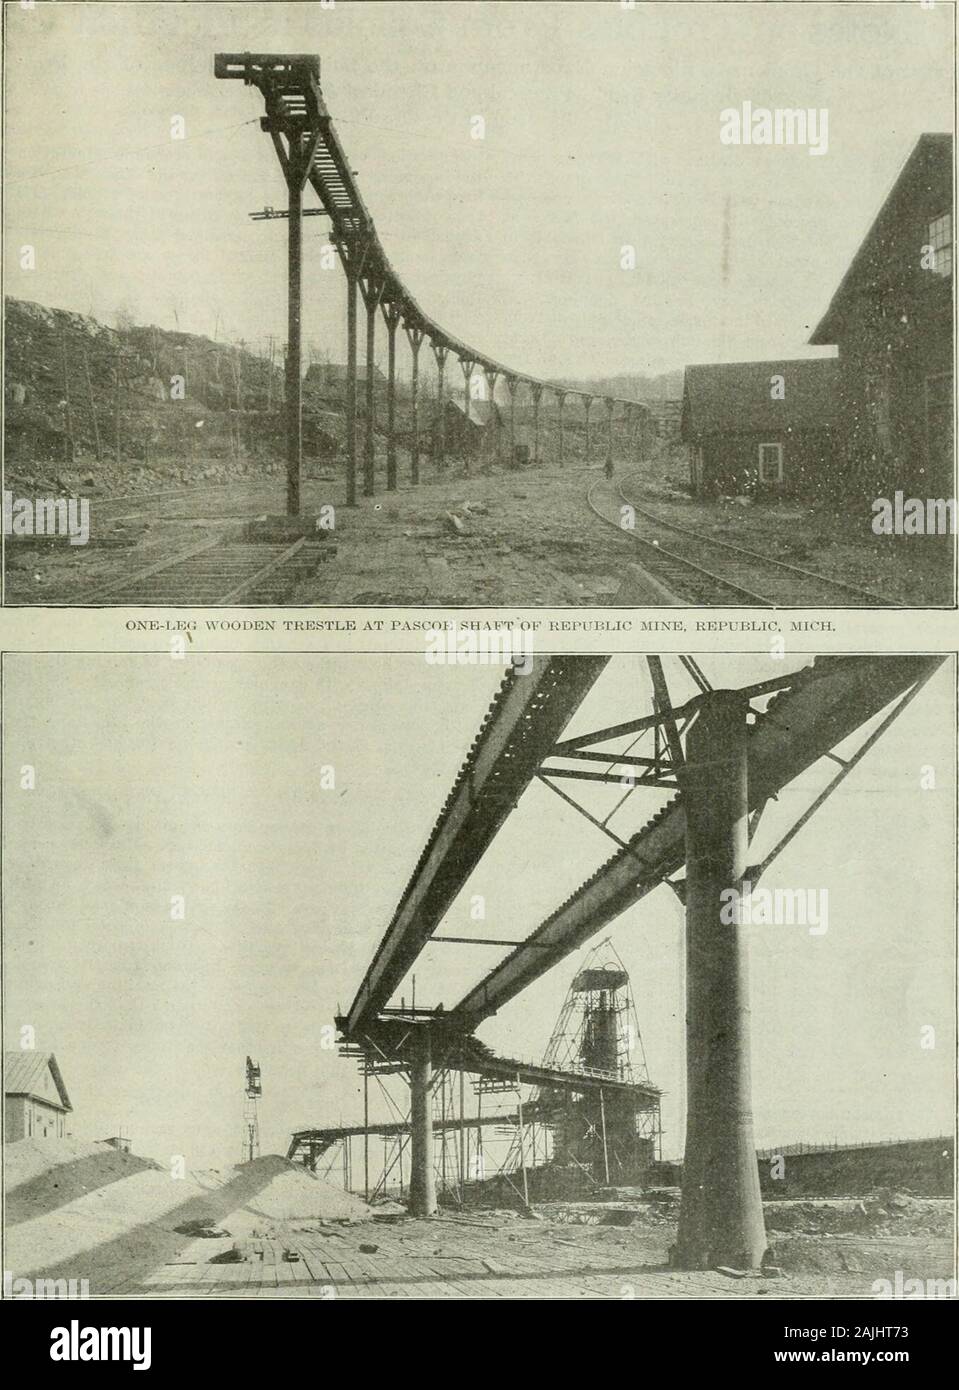 E/MJ : engineering and mining journal . TYPE OF TRESTLE AT MORRIS MINE. IN THE NORTH L.MvE DISTRICT OF THE MARQUETTE K.VNCili September 20, 1919 Engineering and Mining Journal 509. permanent stocking trestle at no. 3 SHAFT, NEGAUXEE MINE. XEGAlXEE. MICH.Piers are set at 114-ft. centers. Height to top of rail is 42 ft. iPhotOB (if thin saies arc hy Chilis Art Orillery, hhpcinino. Mich.) 510 Enginbeeing and Mining Journal Vol. 108, No. 12 Notes on Troubles From Colloids in Flotation Review of the Opinions of Flotation Experimenters on the Subject—Advantage of the Pres-ence of Granular Sand—Physi Stock Photo